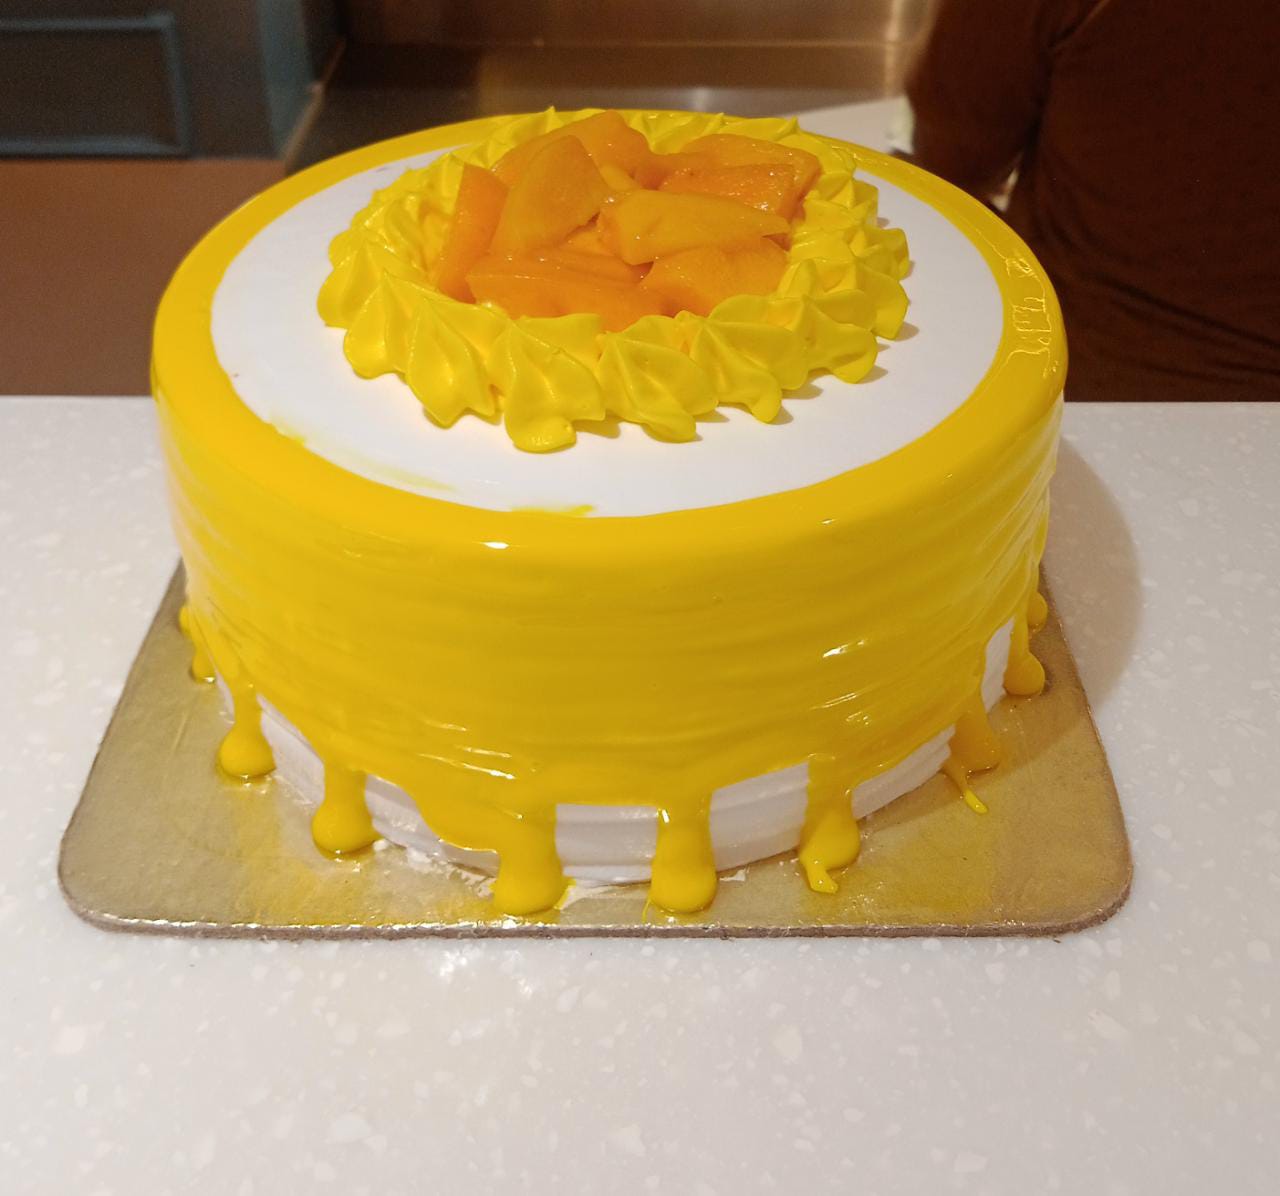 Buy/Send Fresh Mango Cake with online delivery from Baker's Wagon